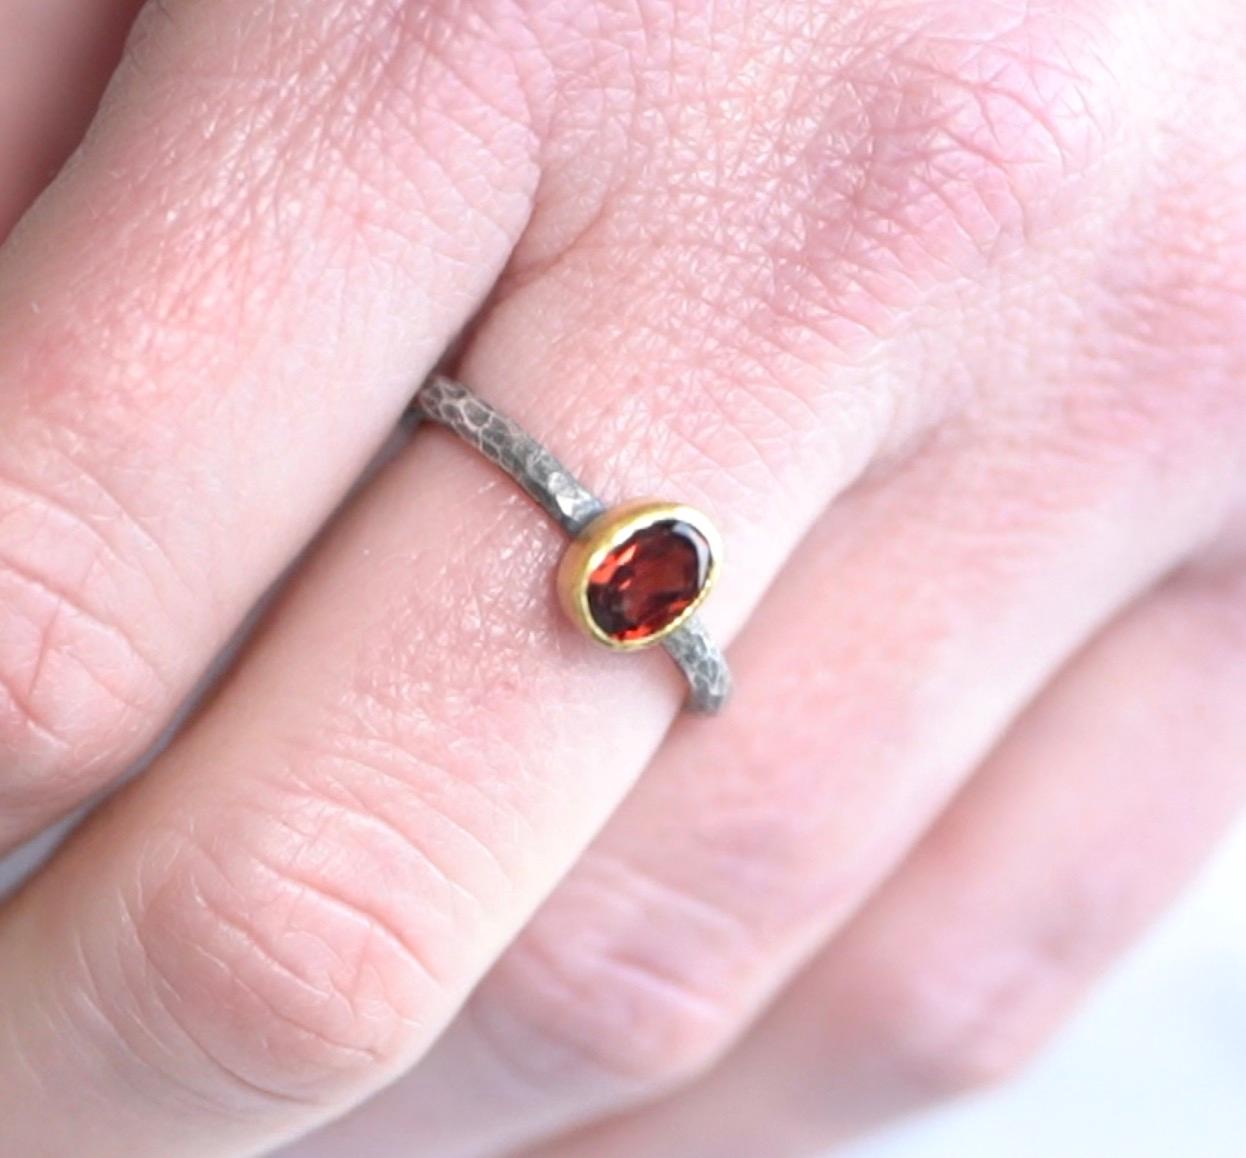 Dark Red, Oval, Garnet Solitaire Ring, 24kt Gold and Silver by Prehistoric Works of Istanbul, Turkey. Garnet - 1.00ct.  Band is slightly hammered and pairs well with stacking with other bands in the gallery. Size 7 US